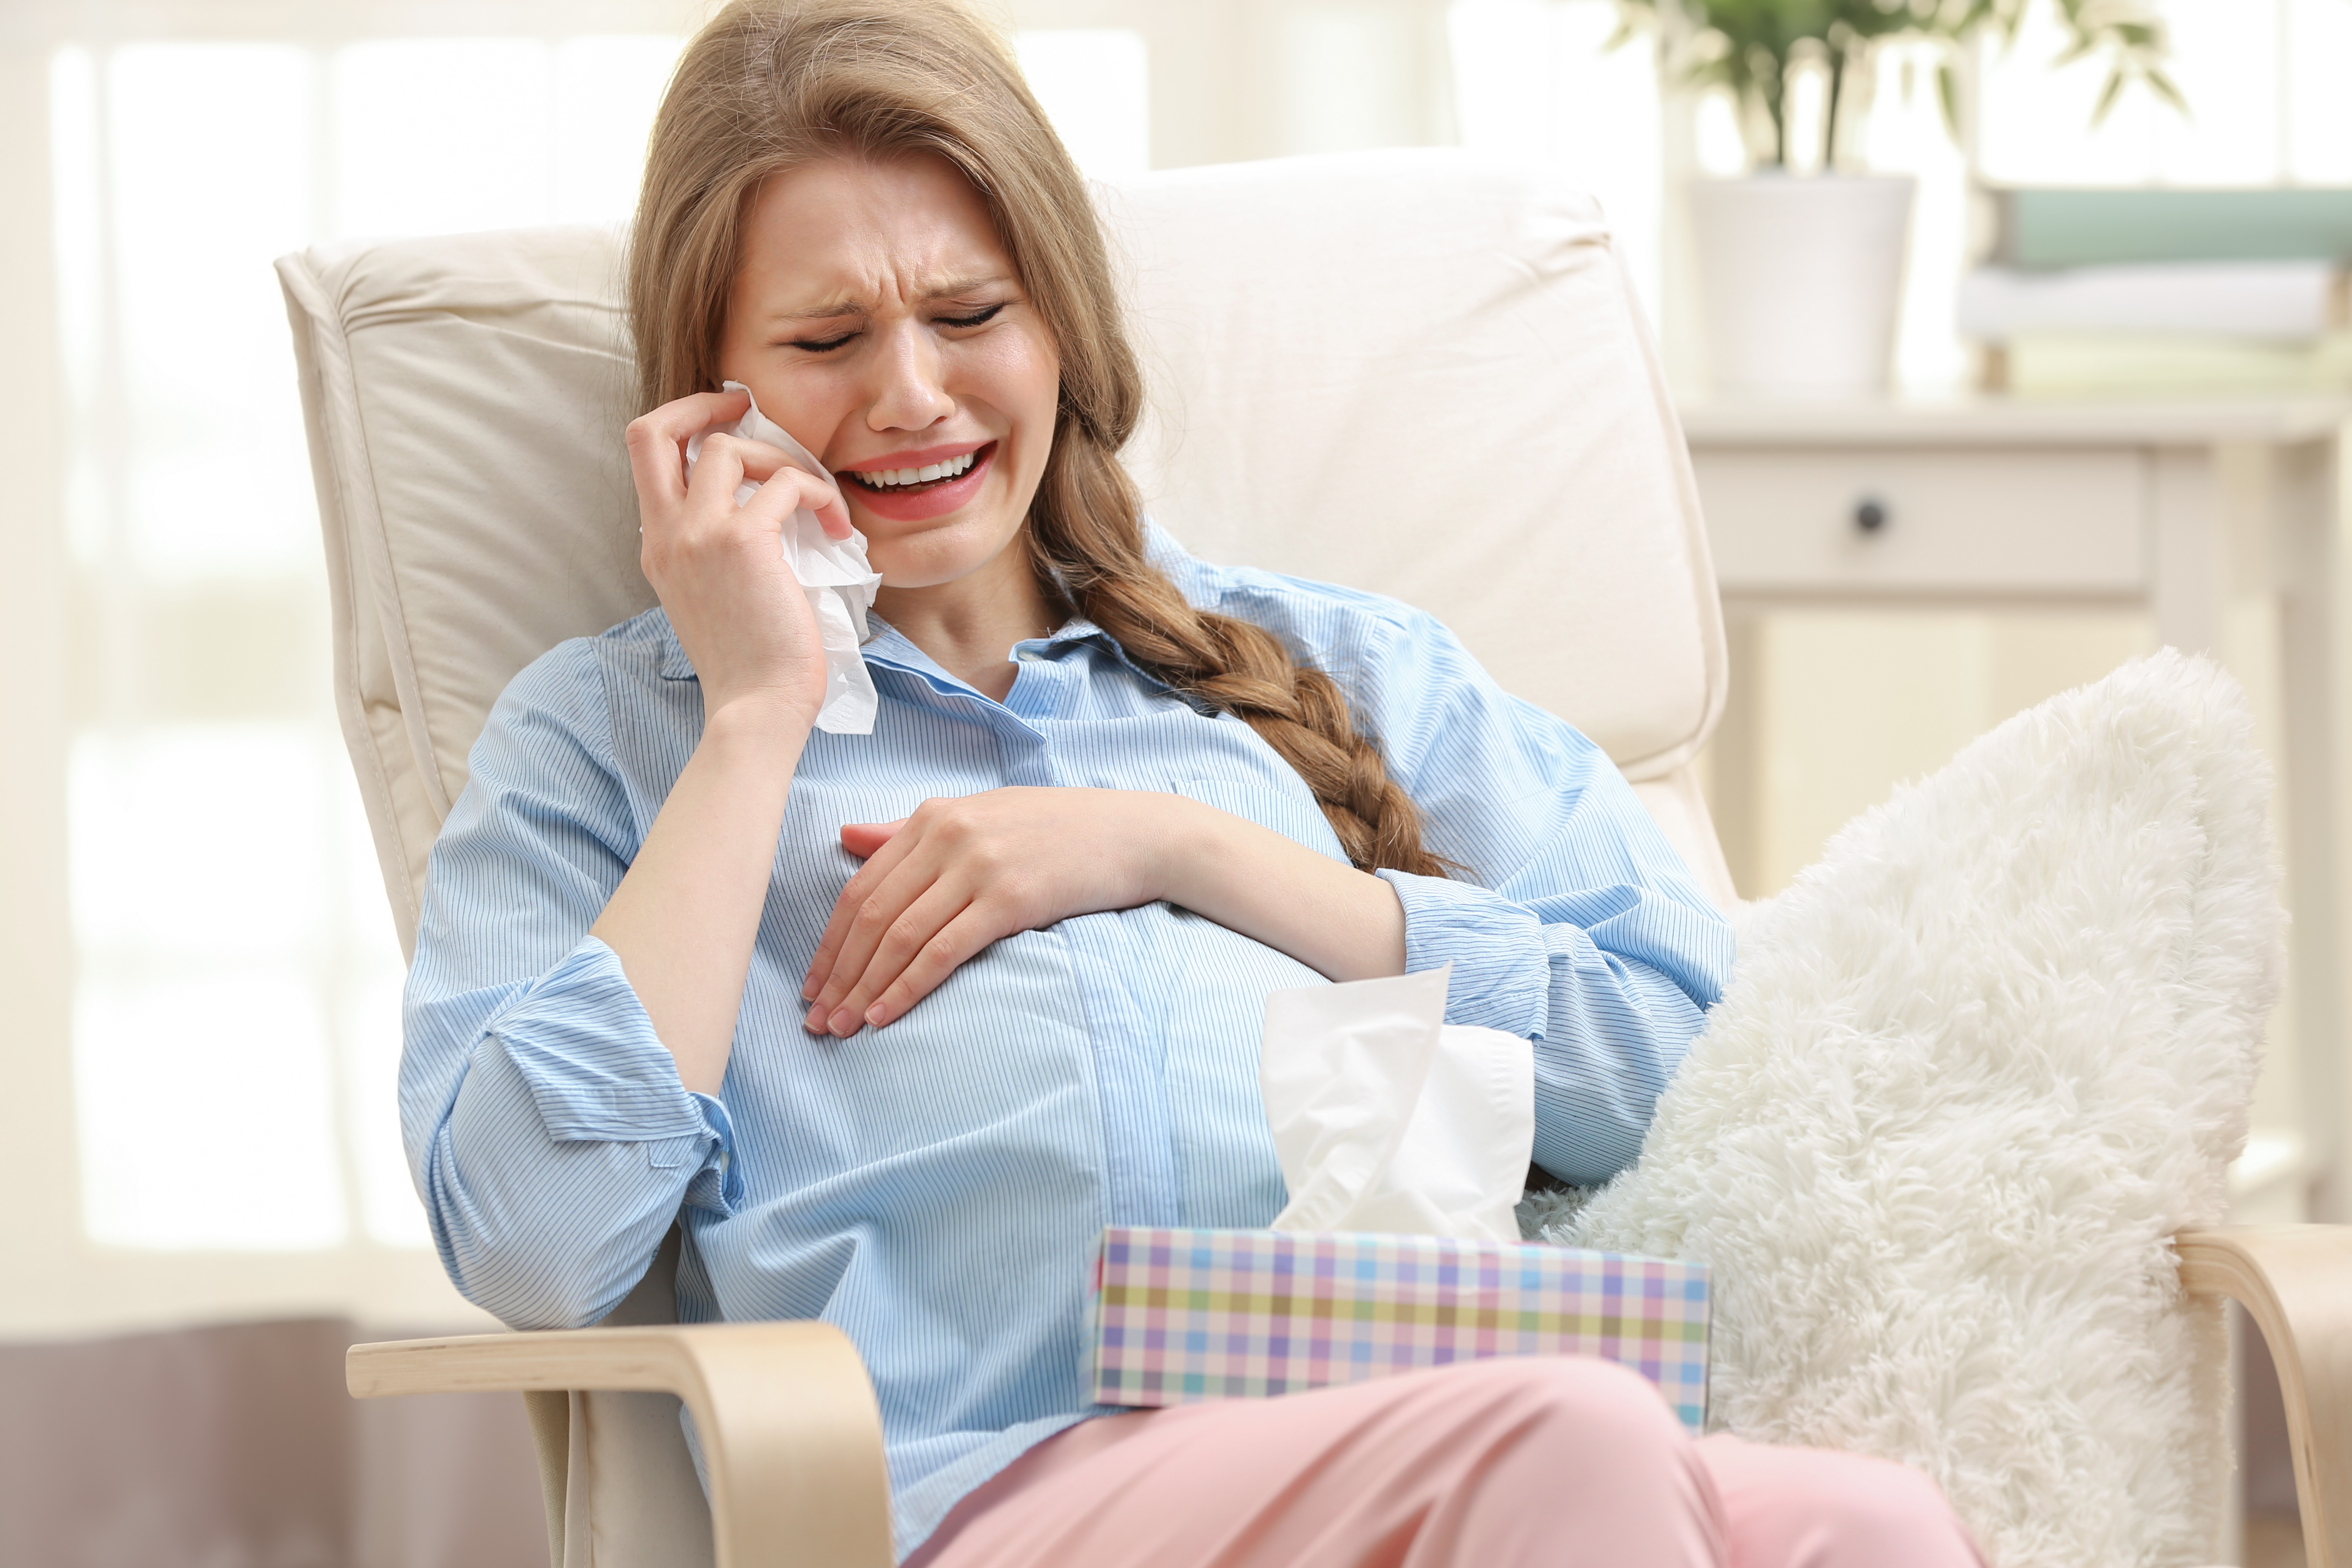 A pregnant woman crying | Source: Shutterstock